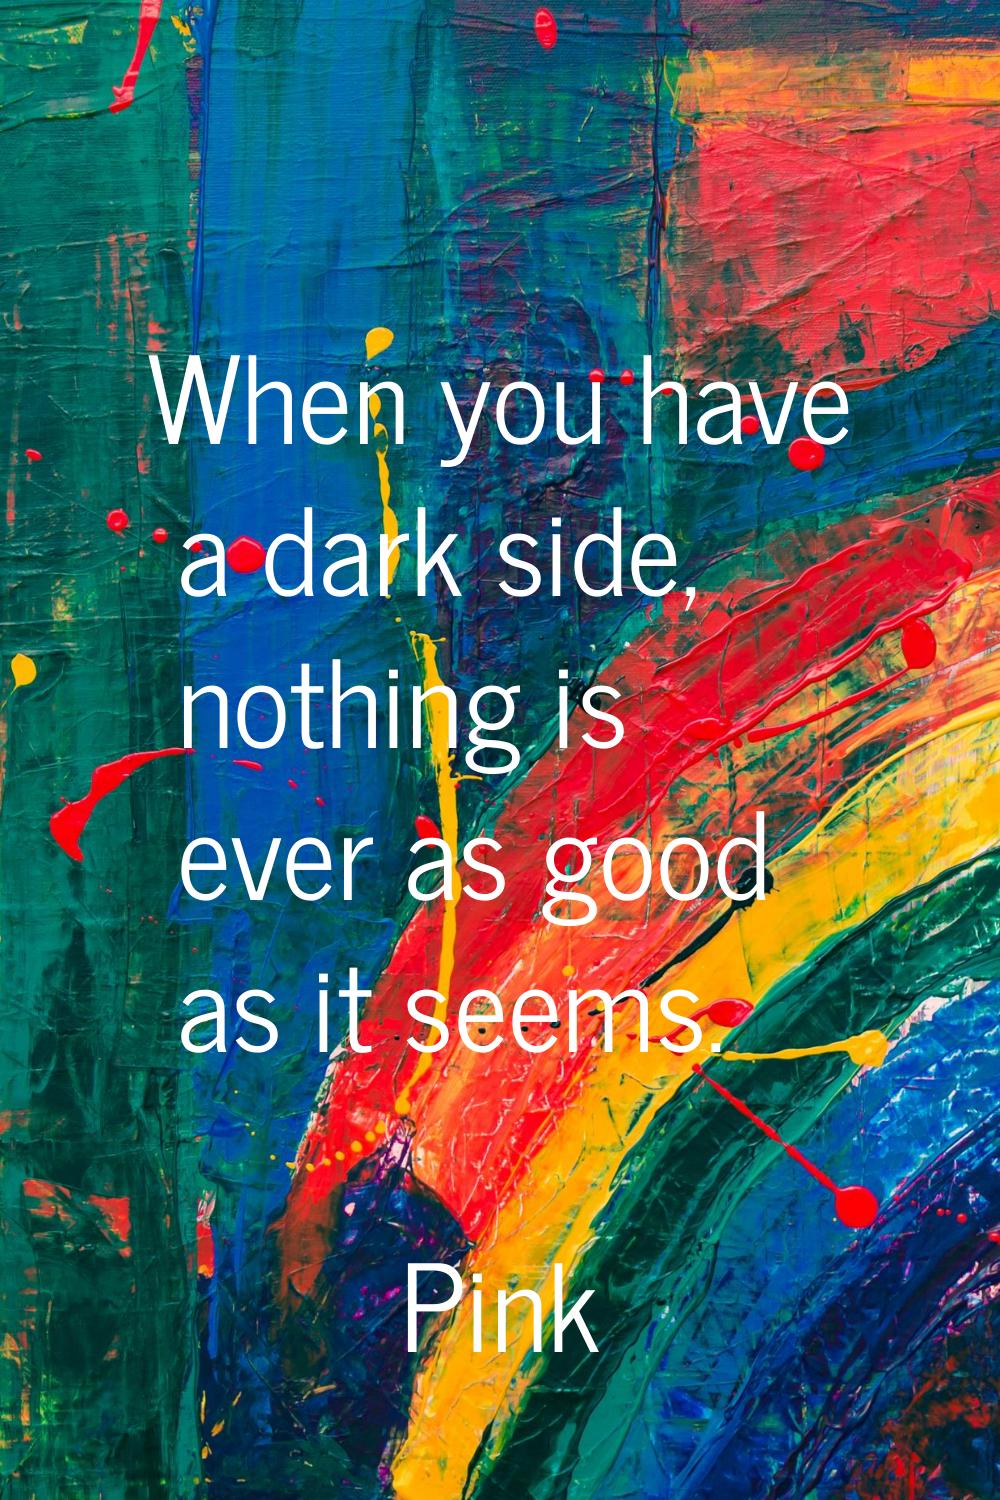 When you have a dark side, nothing is ever as good as it seems.